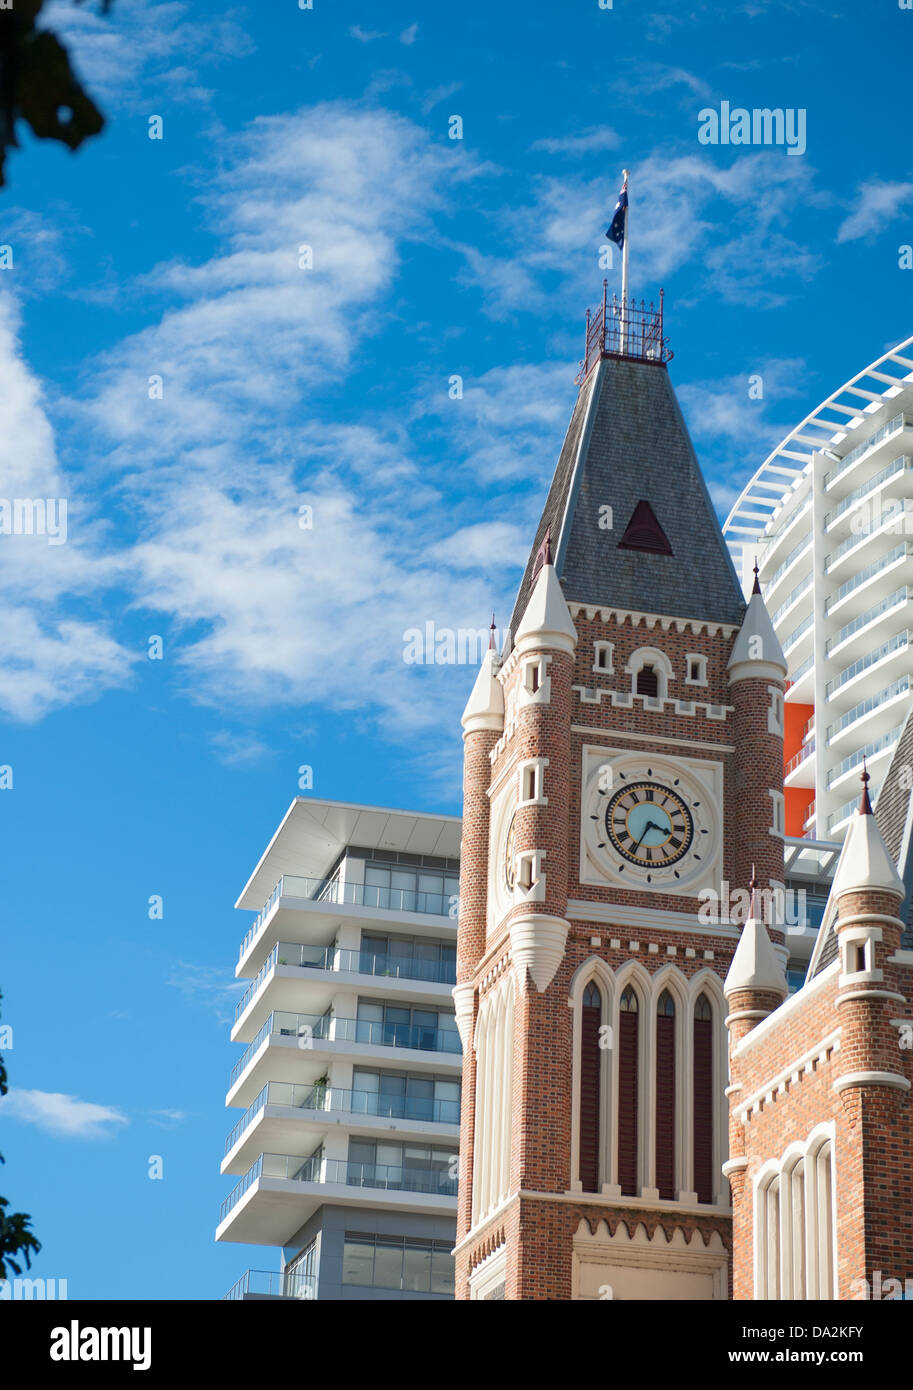 The tower of convict-built town hall at Hay Street against the facade of a modern skyscraper at Perth, Western Australia Stock Photo